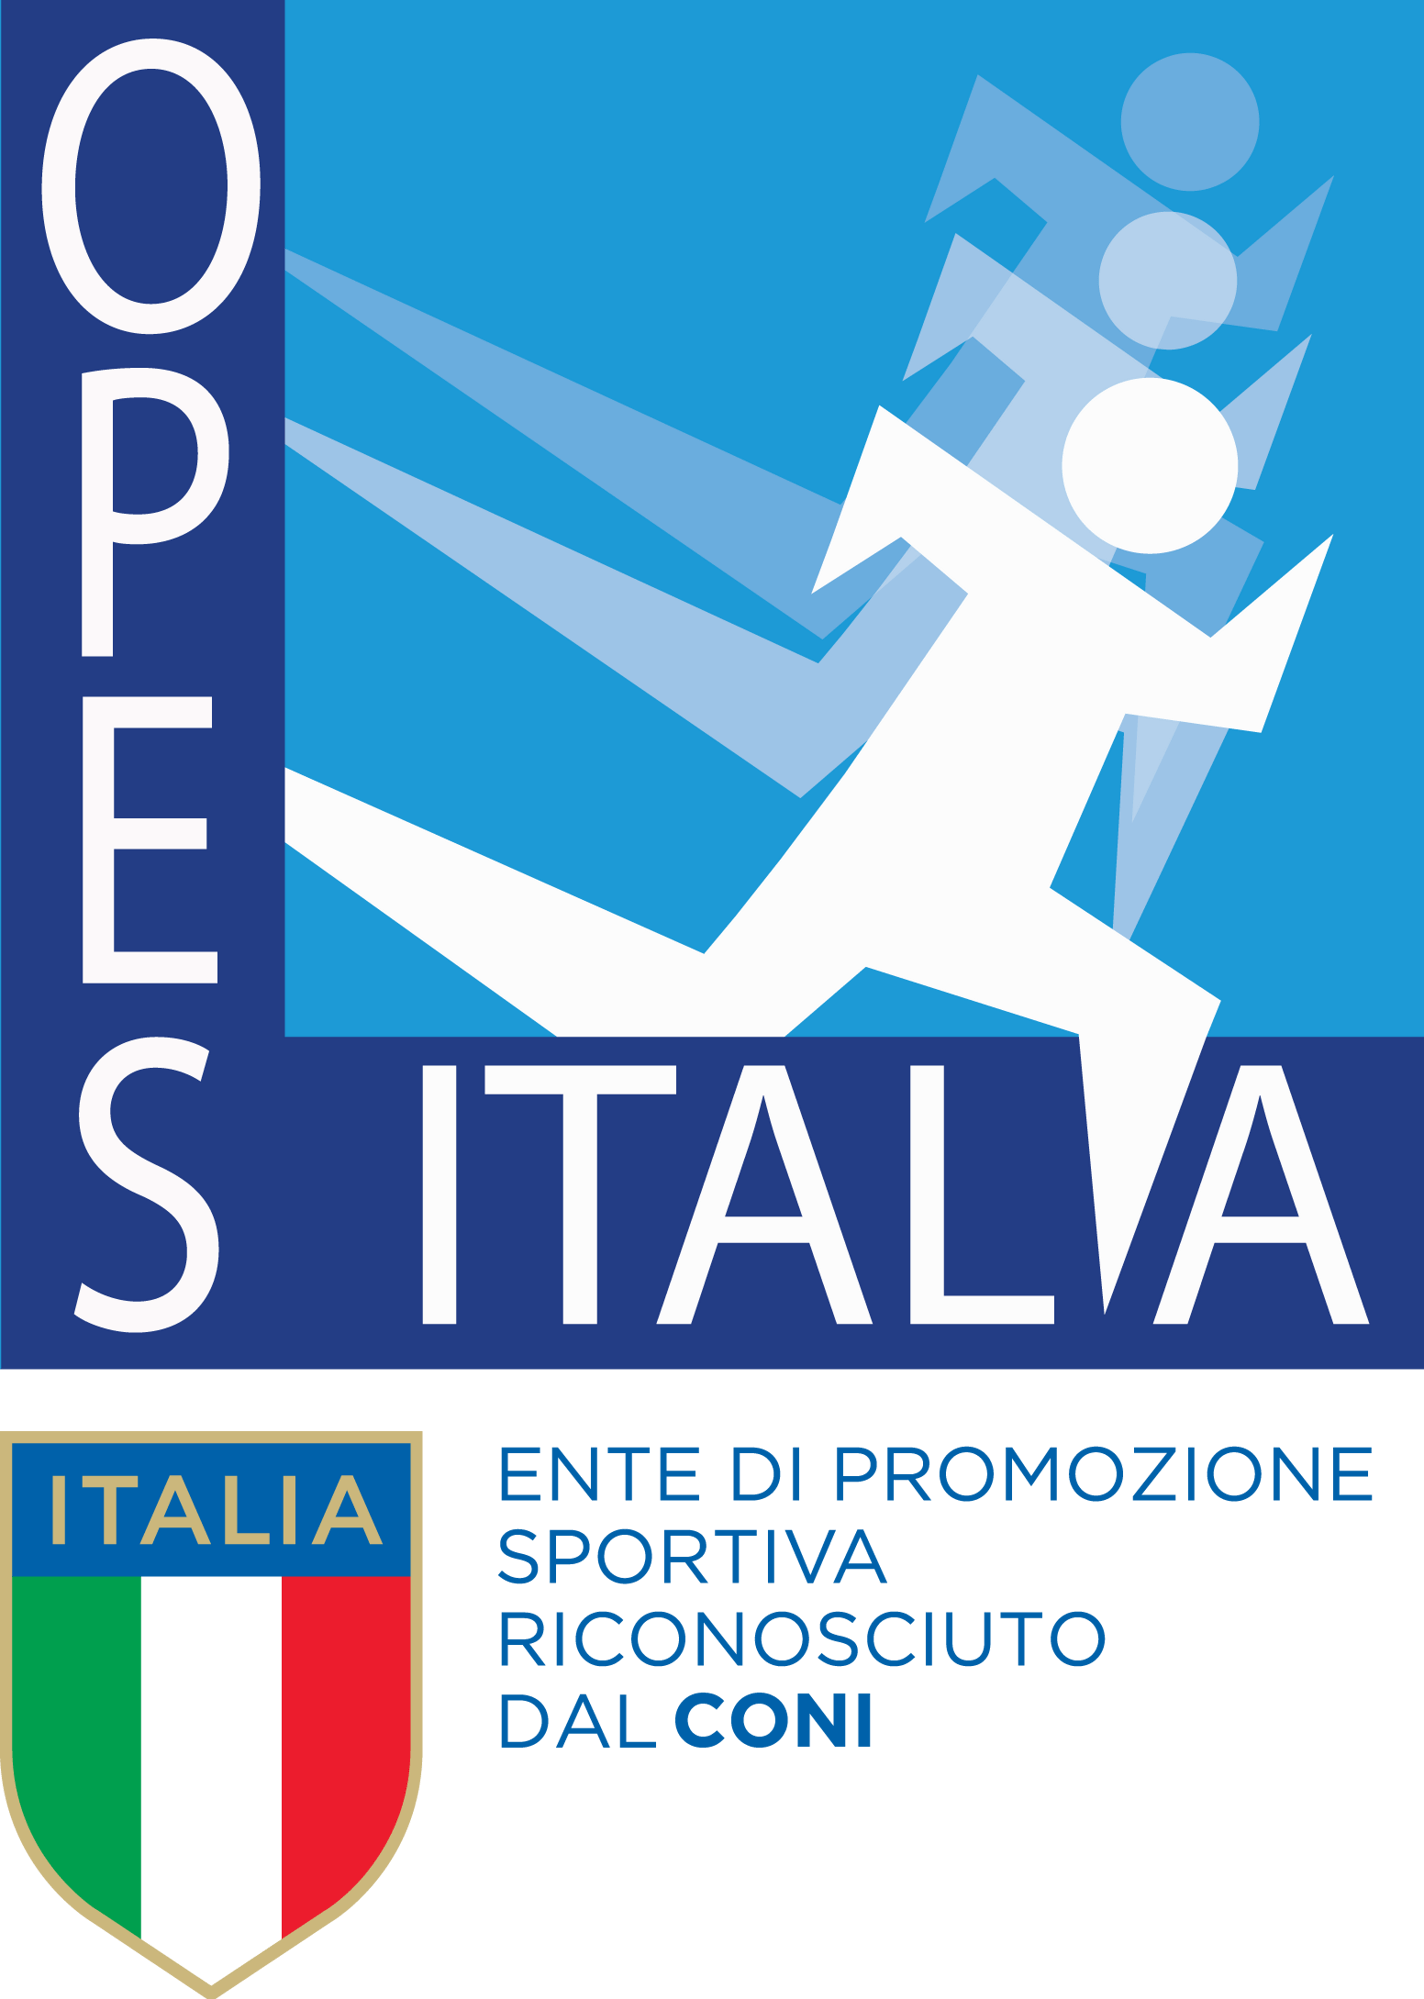 Photopress  Mondo sommerso - opes-italia.png